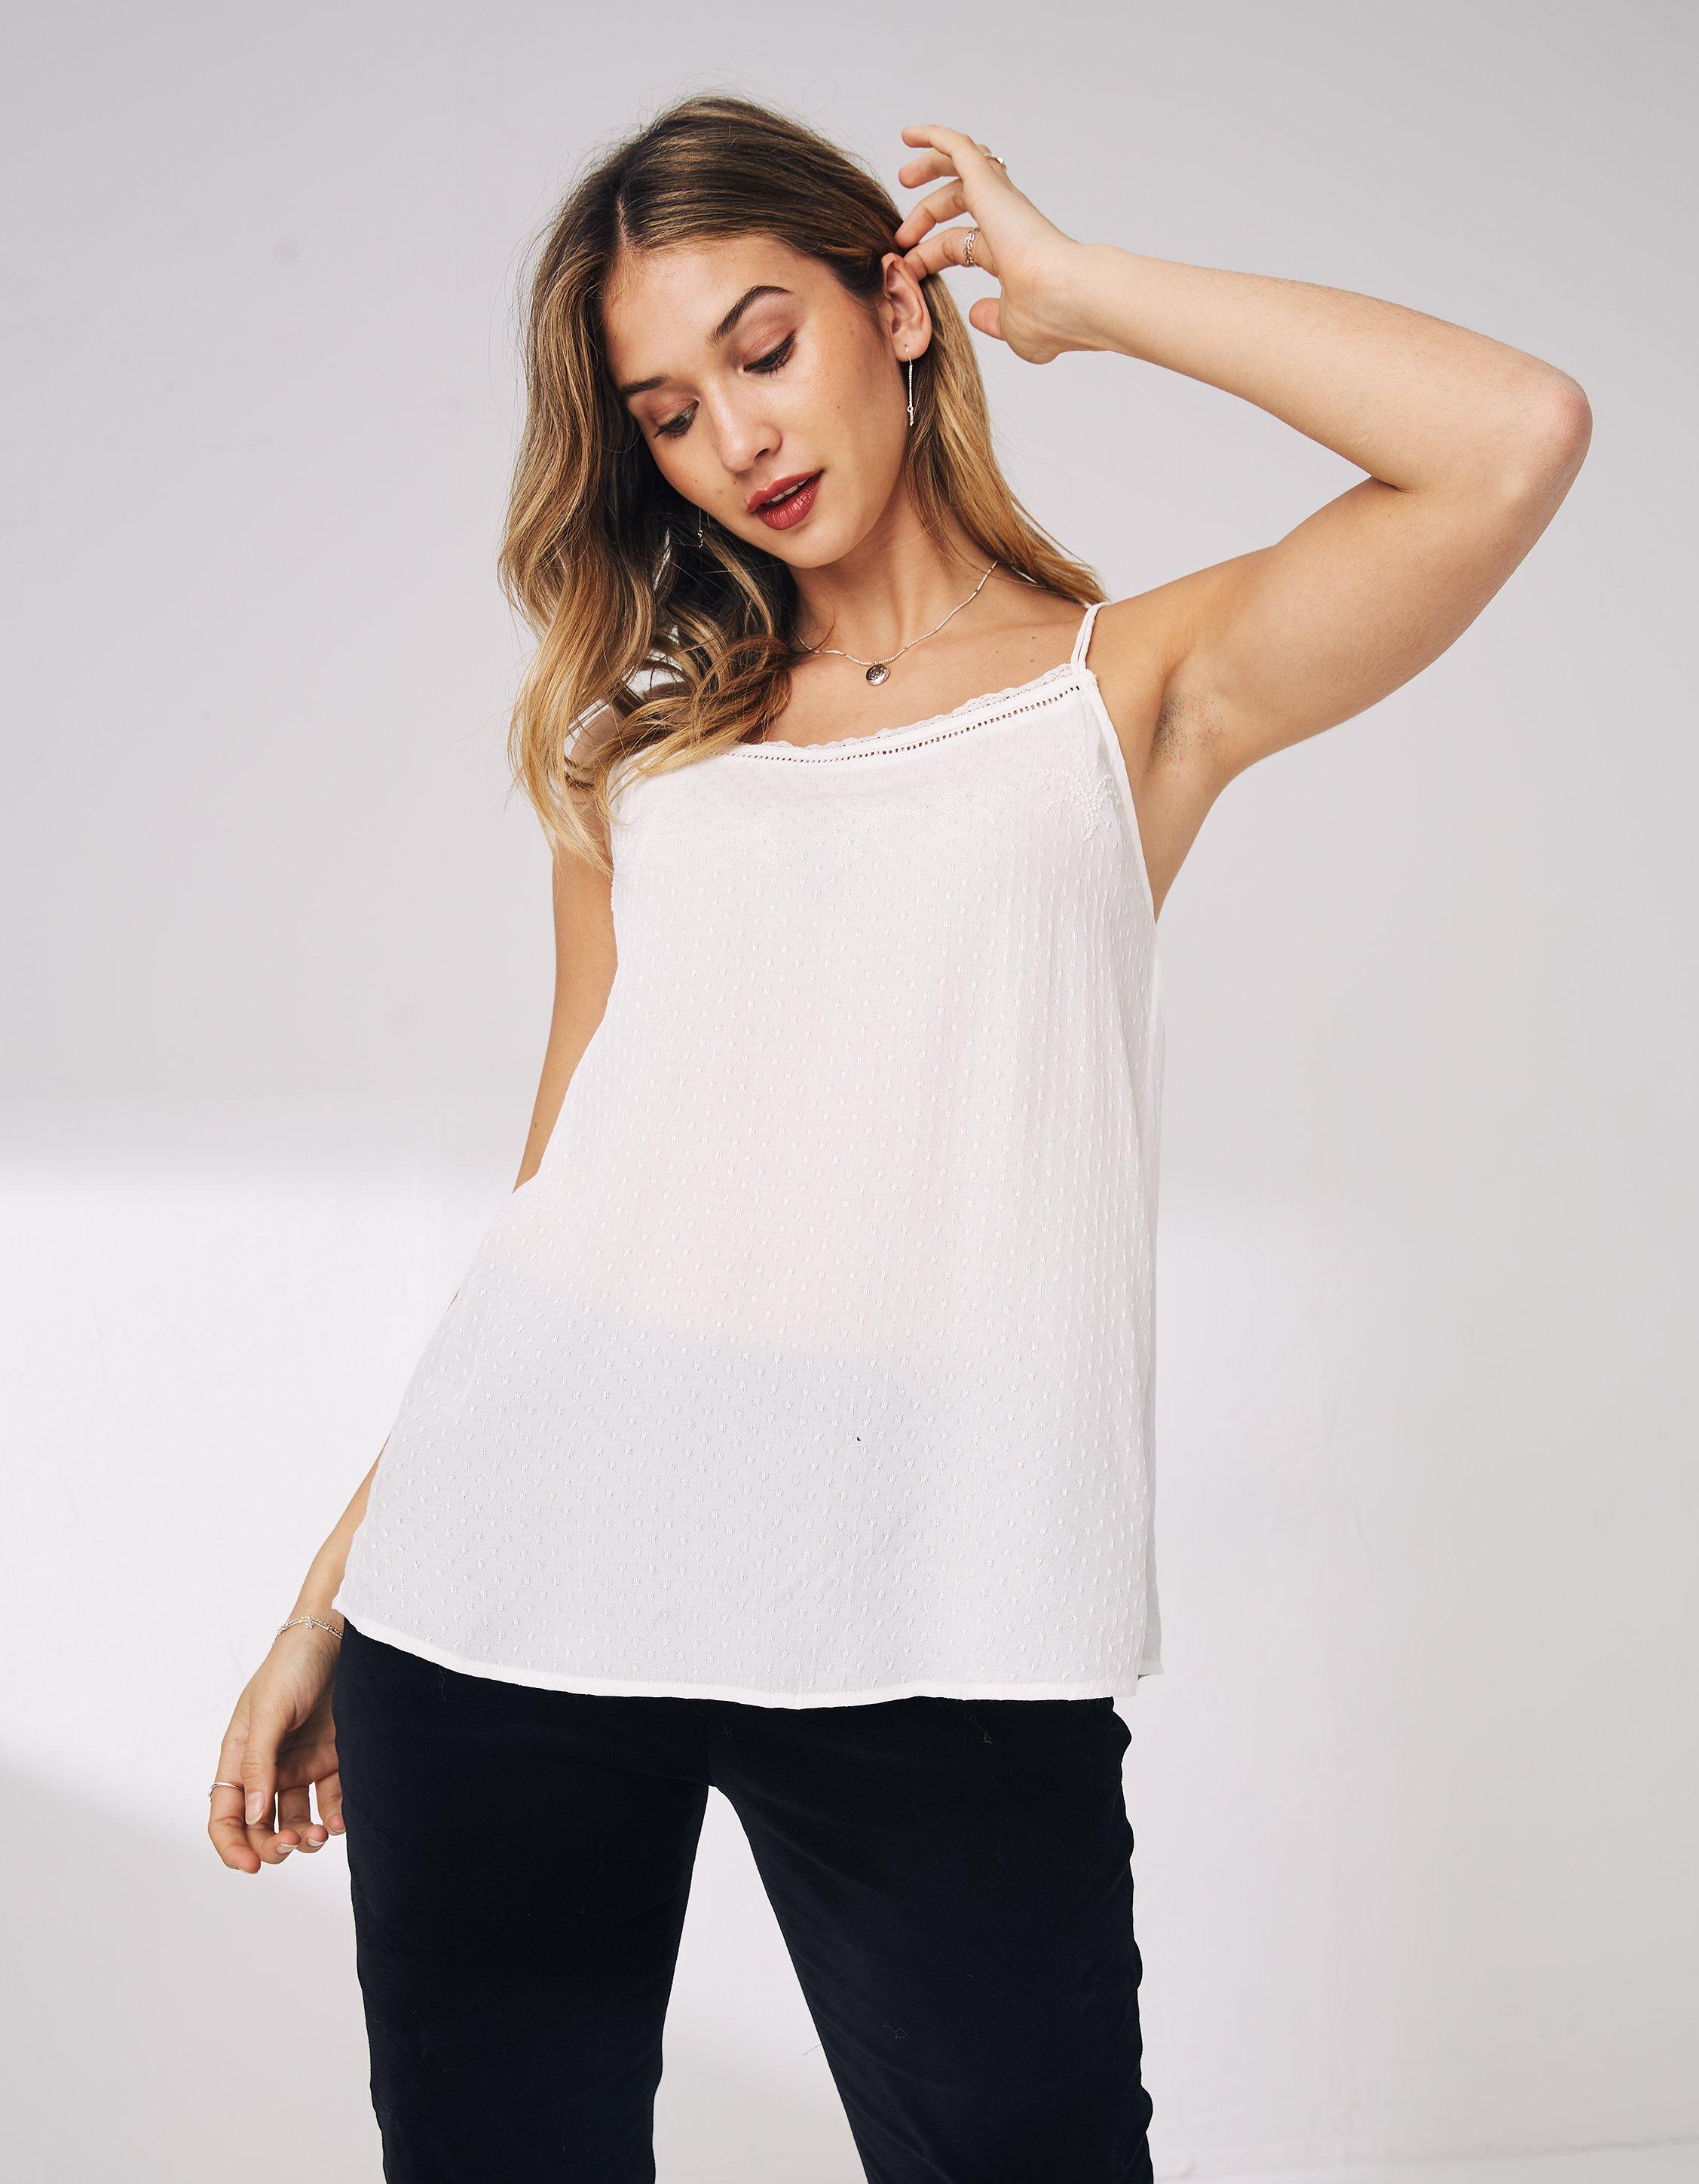 Cynthia Embroidered Cami, Tops & T-Shirts